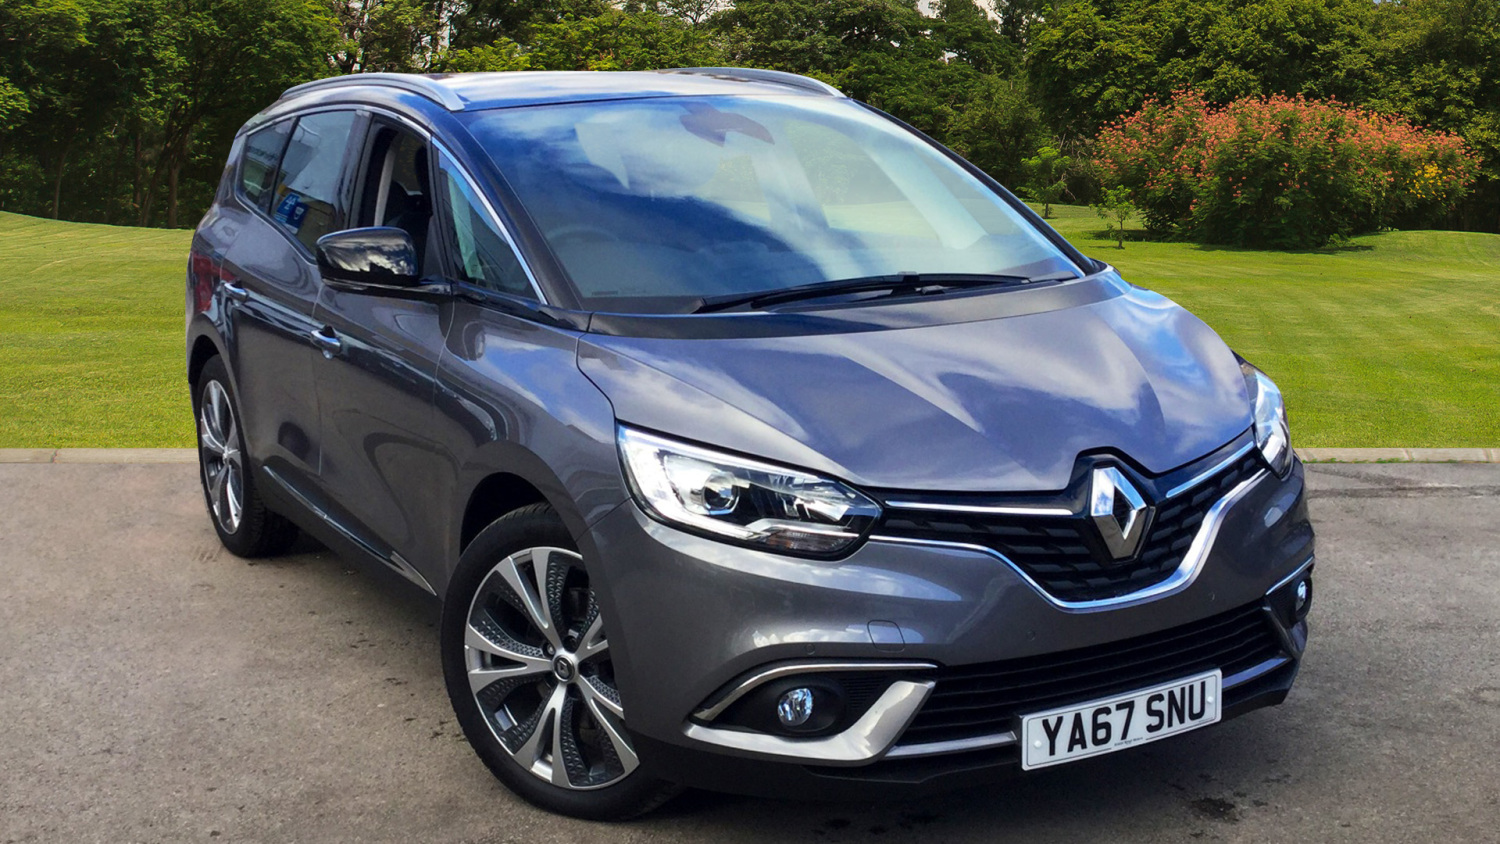 Used Renault Grand Scenic 1.6 dCi Dynamique Nav 5dr Diesel